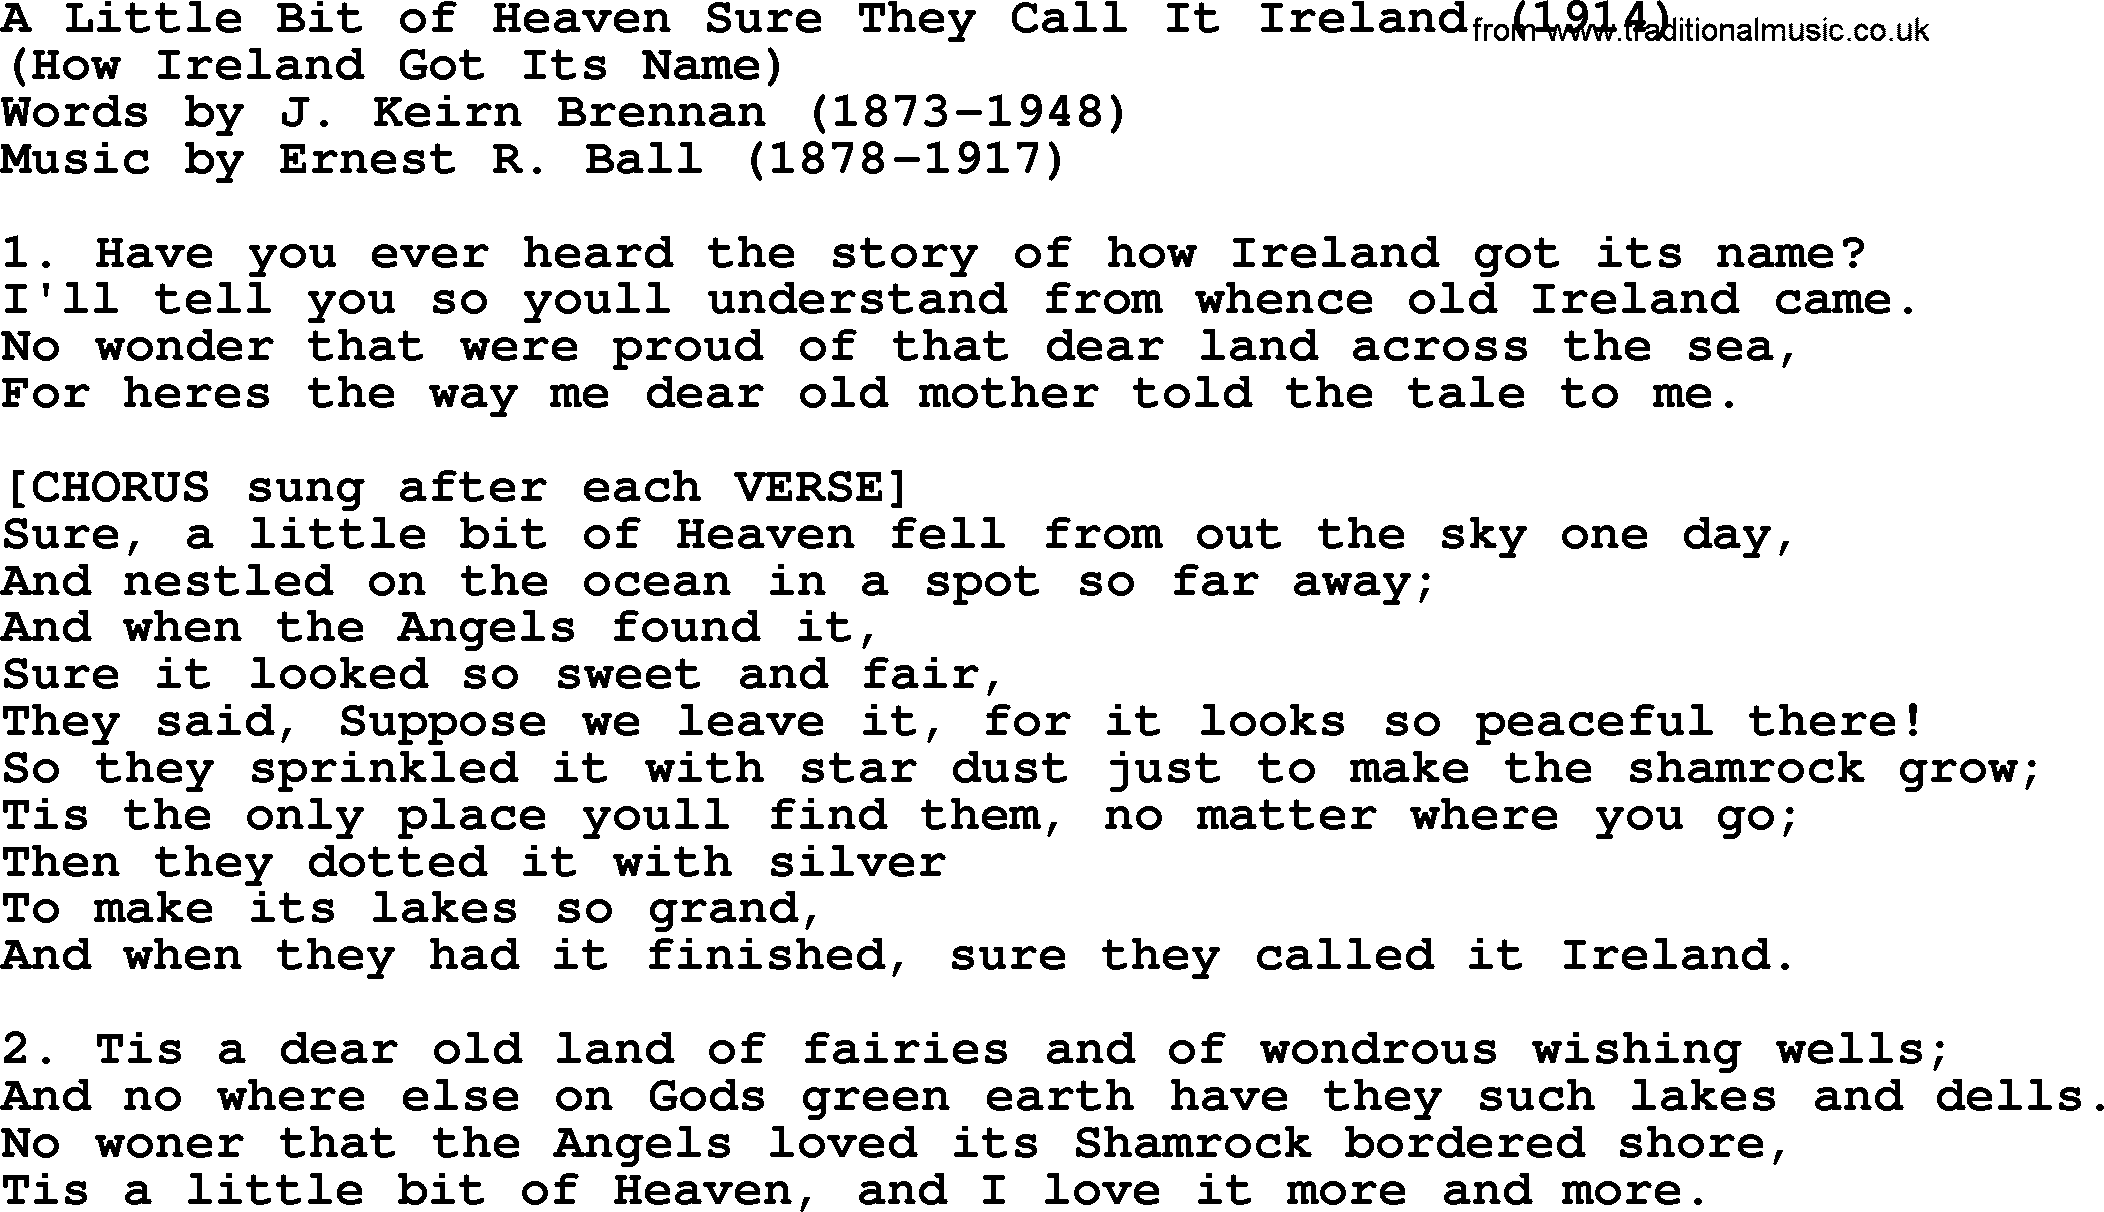 World War(WW1) One Song: A Little Bit Of Heaven Sure They Call It Ireland 1911, lyrics and PDF